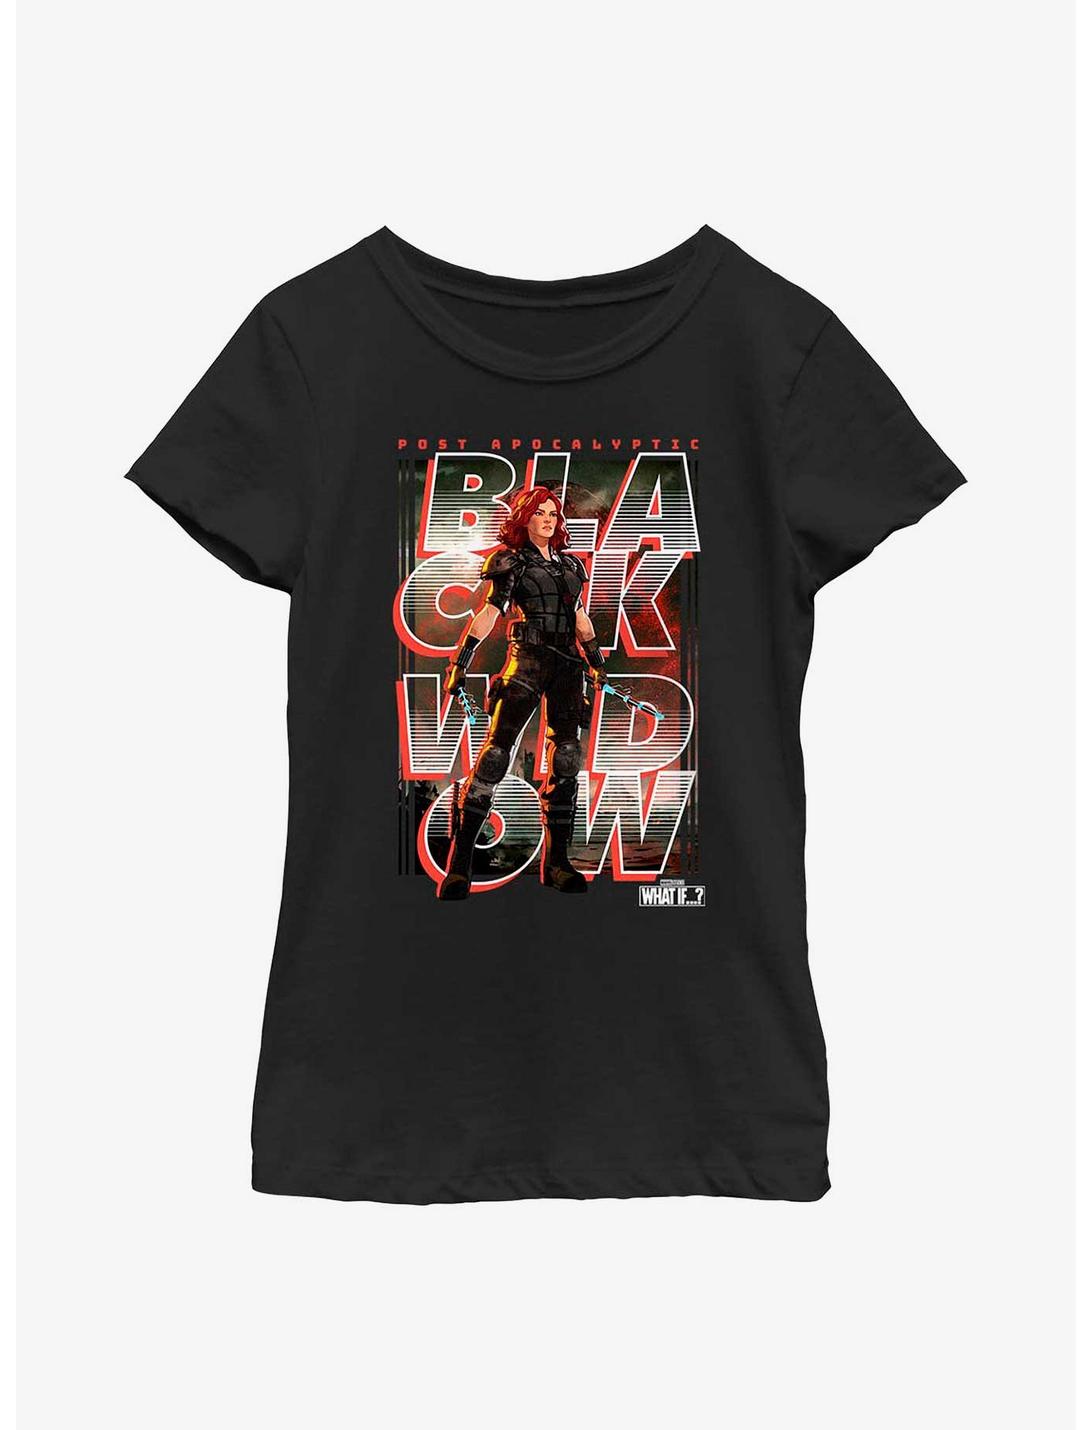 Marvel What If?? Black Widow Post Apocalyptic Key Art Youth Girls T-Shirt, BLACK, hi-res